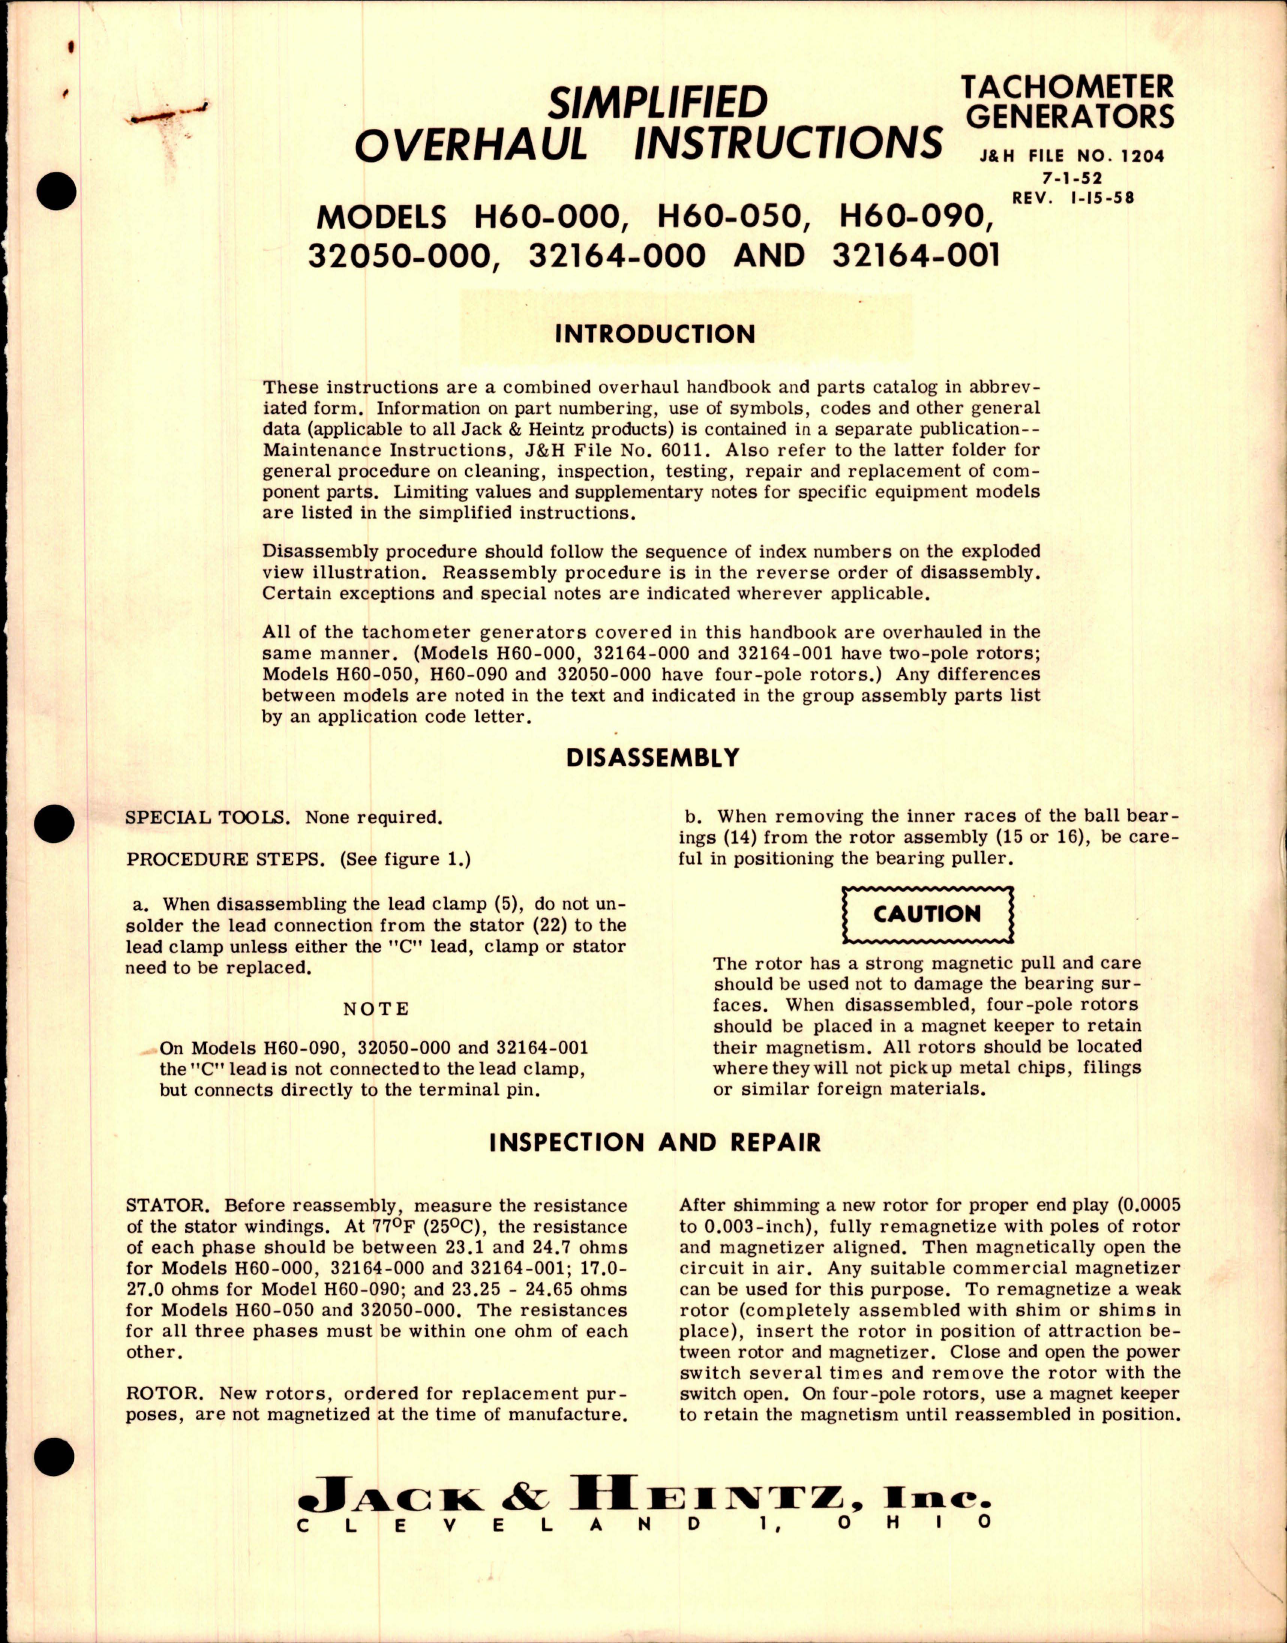 Sample page 1 from AirCorps Library document: Overhaul Instructions for Tachometer Generators 